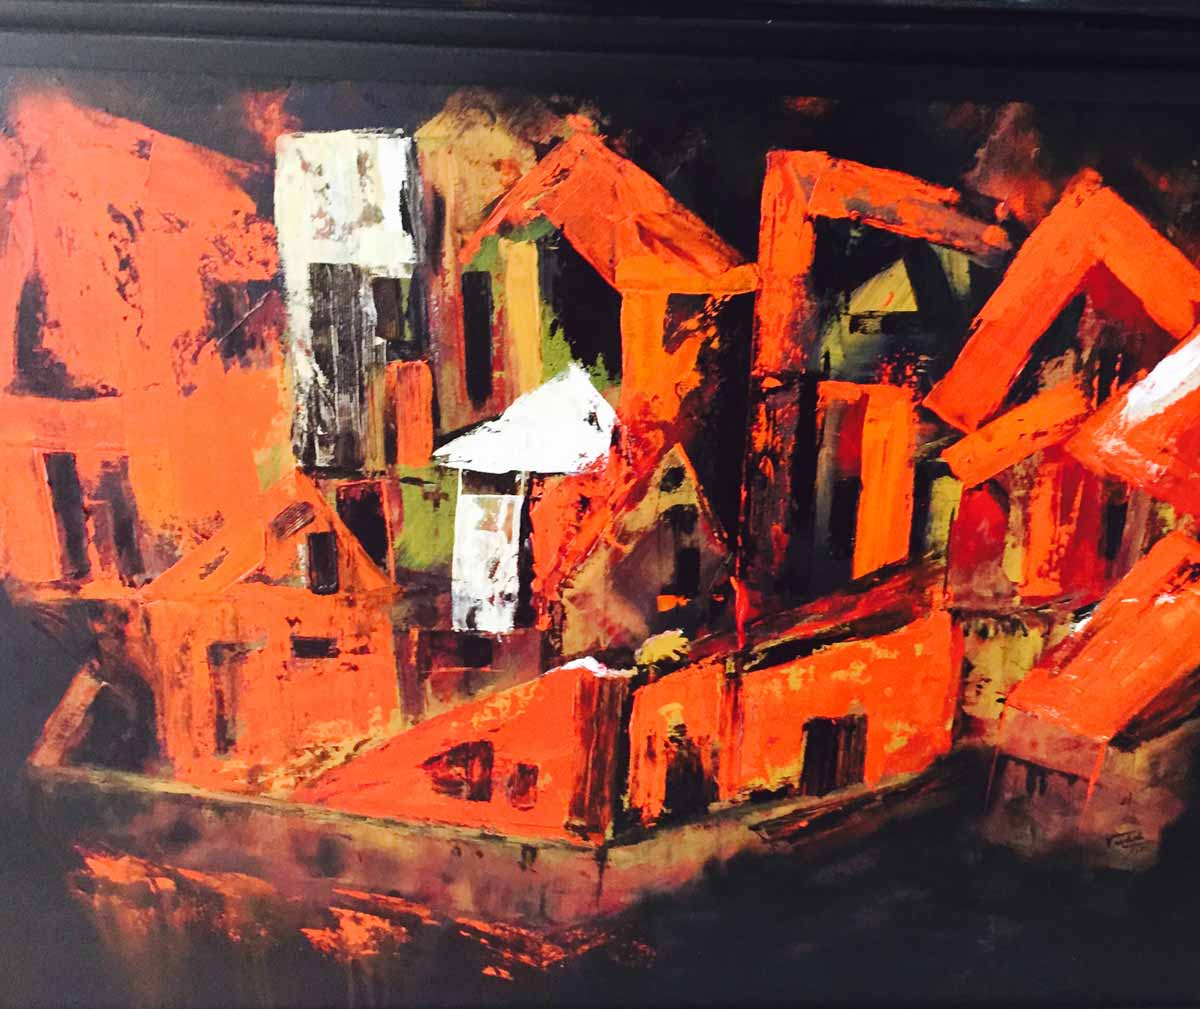 Abstract Painting with Acrylic on Canvas "Dwelling 3" art by Vaishali Rajapurkar